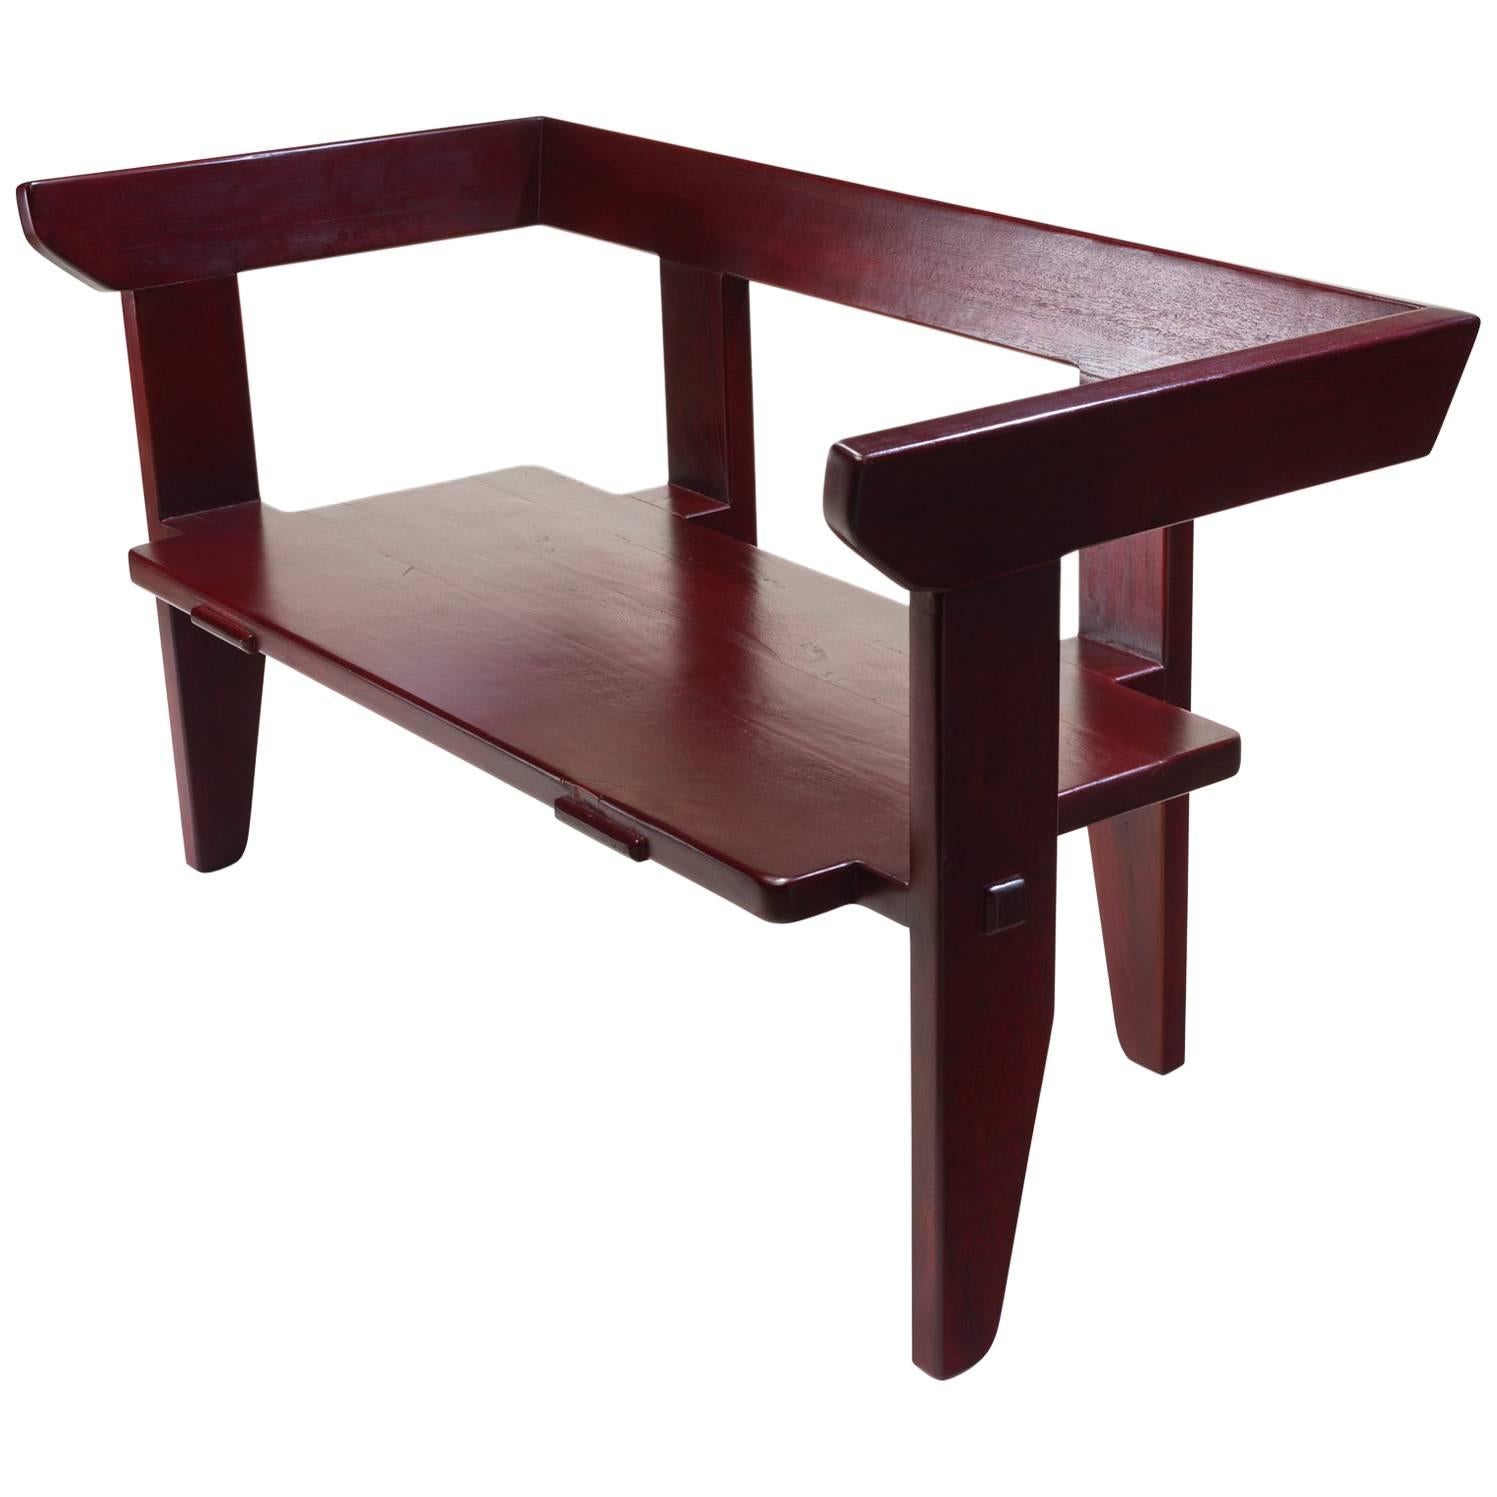 Laredo Bench Contemporary Design Traditional Joinery, Hardwood w/ Lacquer Finish